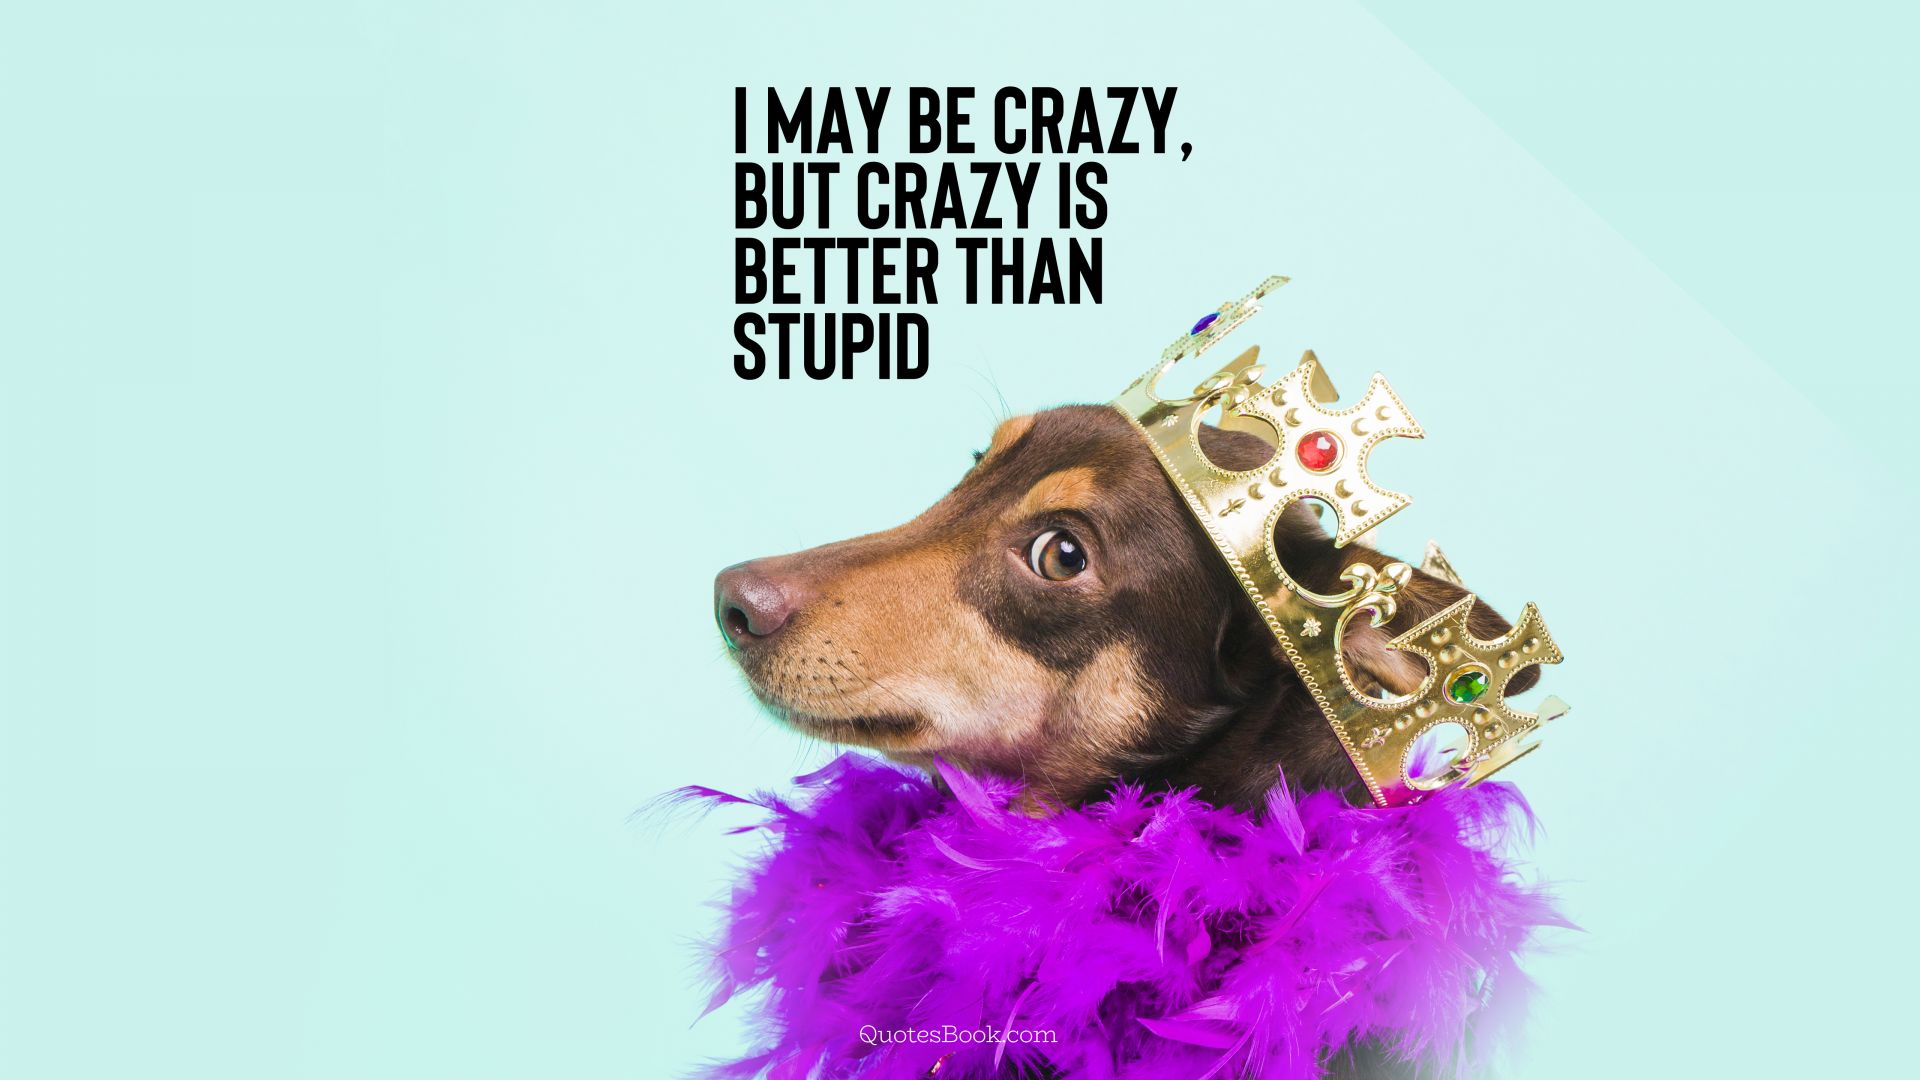 I may be crazy, but crazy is better than stupid